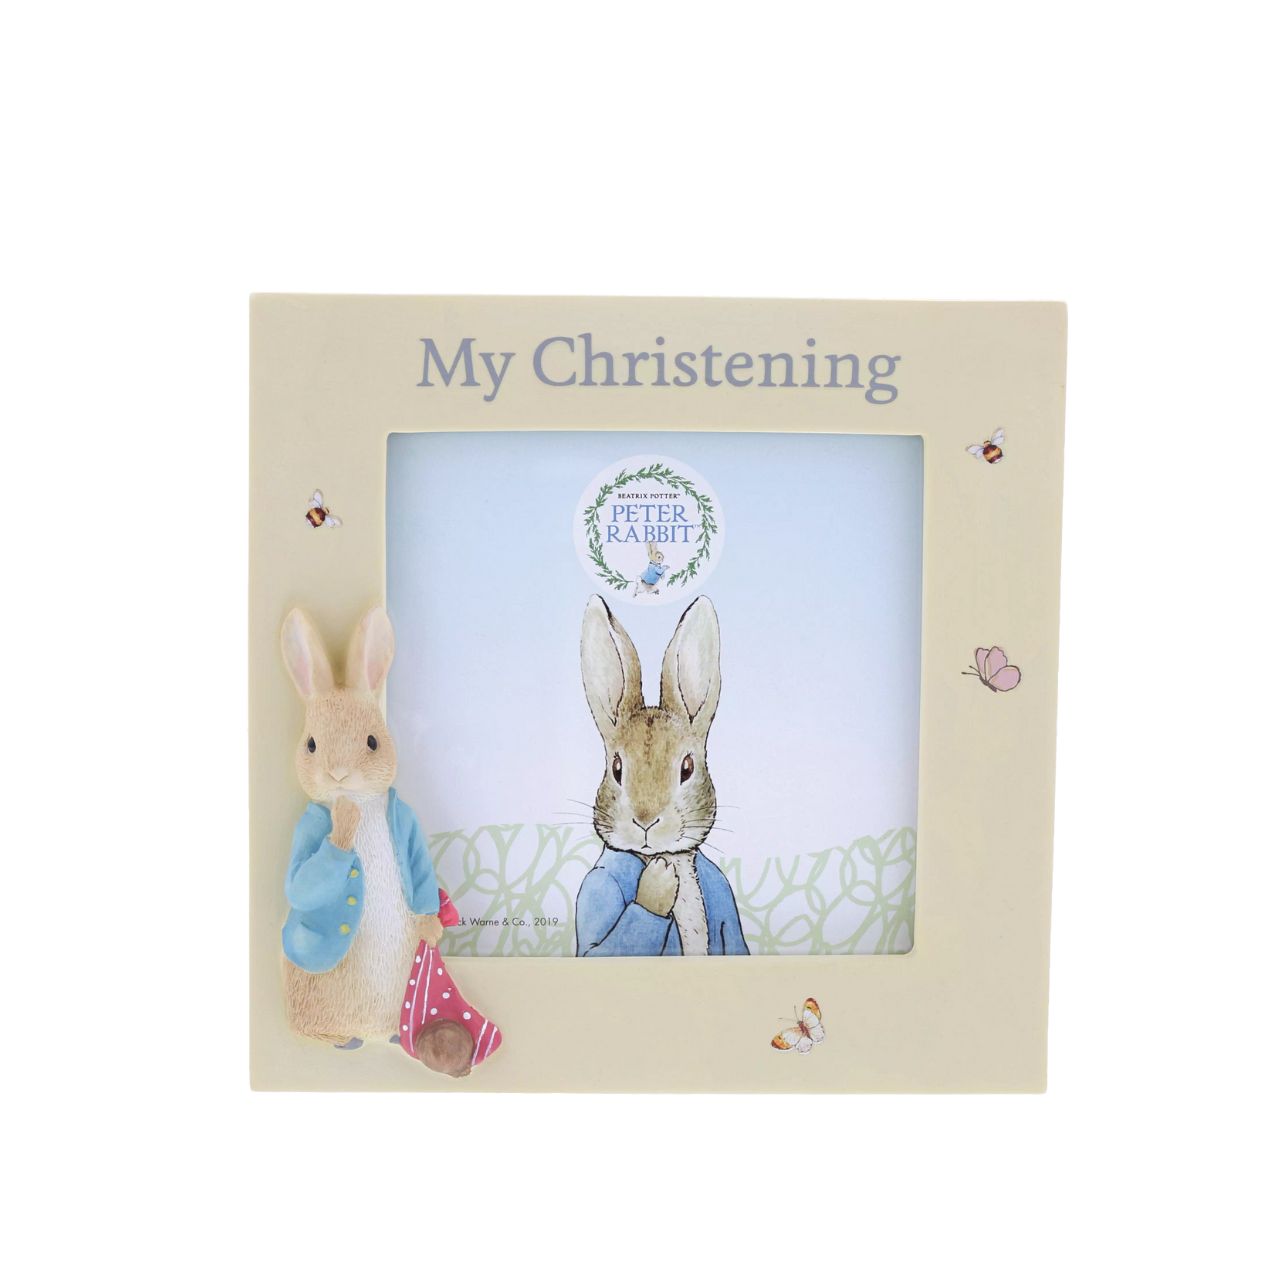 This charming Peter Rabbit Christening Photo frame is the perfect place to display a picture from your little ones Christening and is sure to earn a place of honour on a tabletop or mantel. Complete with original illustrations from the Beatrix Potter stories.